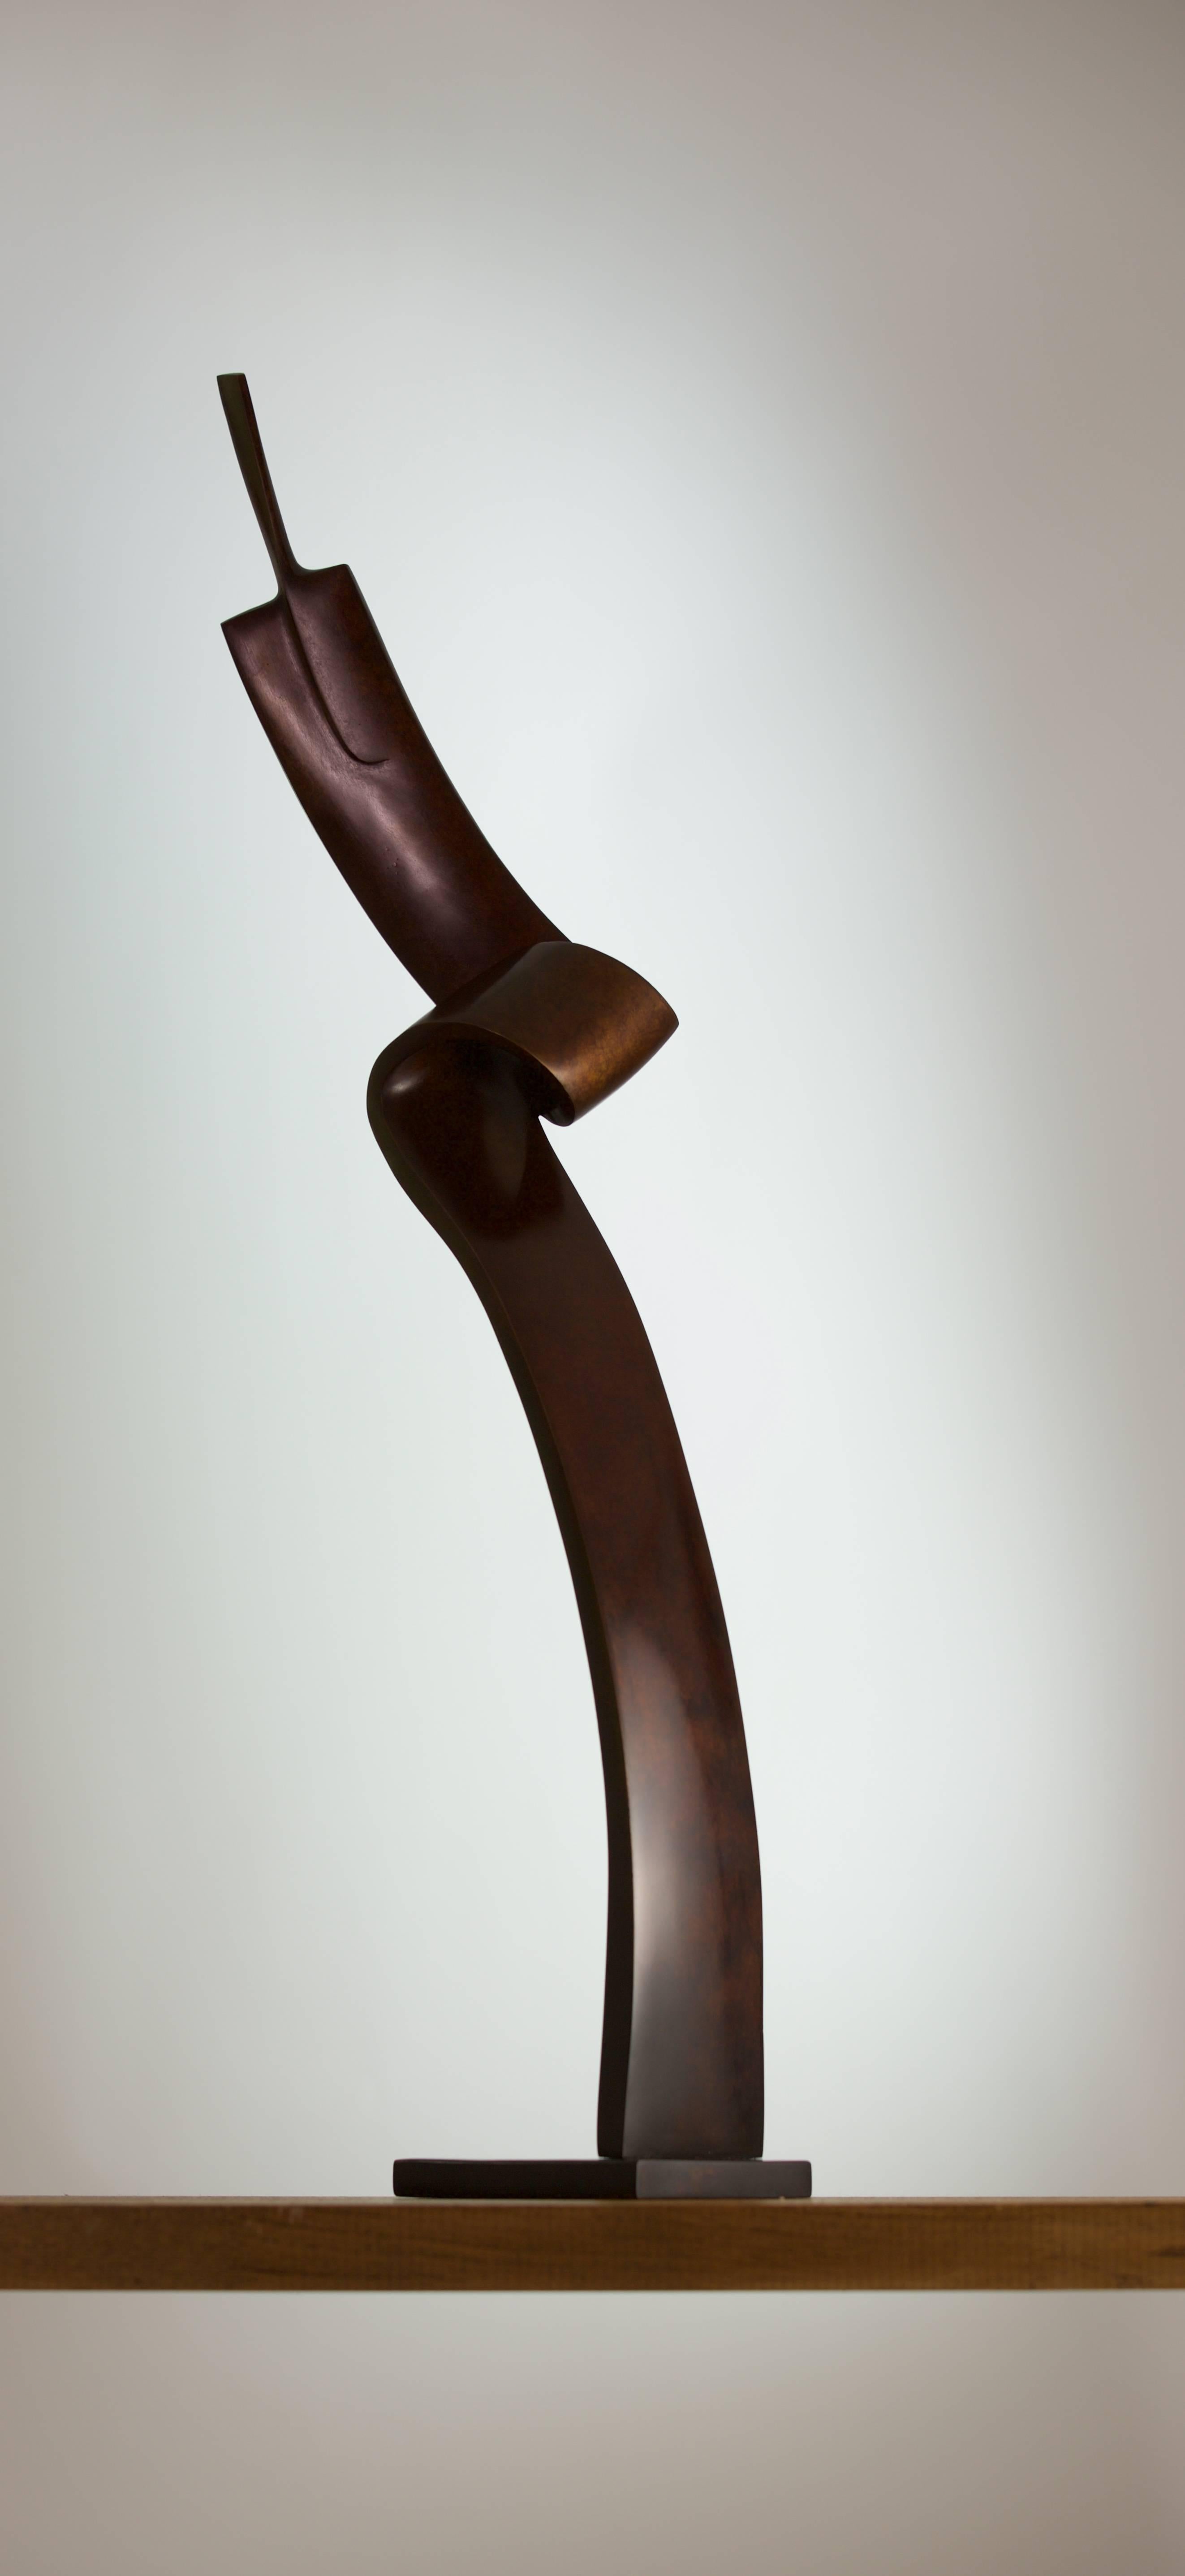 Ruban - Brown Abstract Sculpture by Annette Jalilova